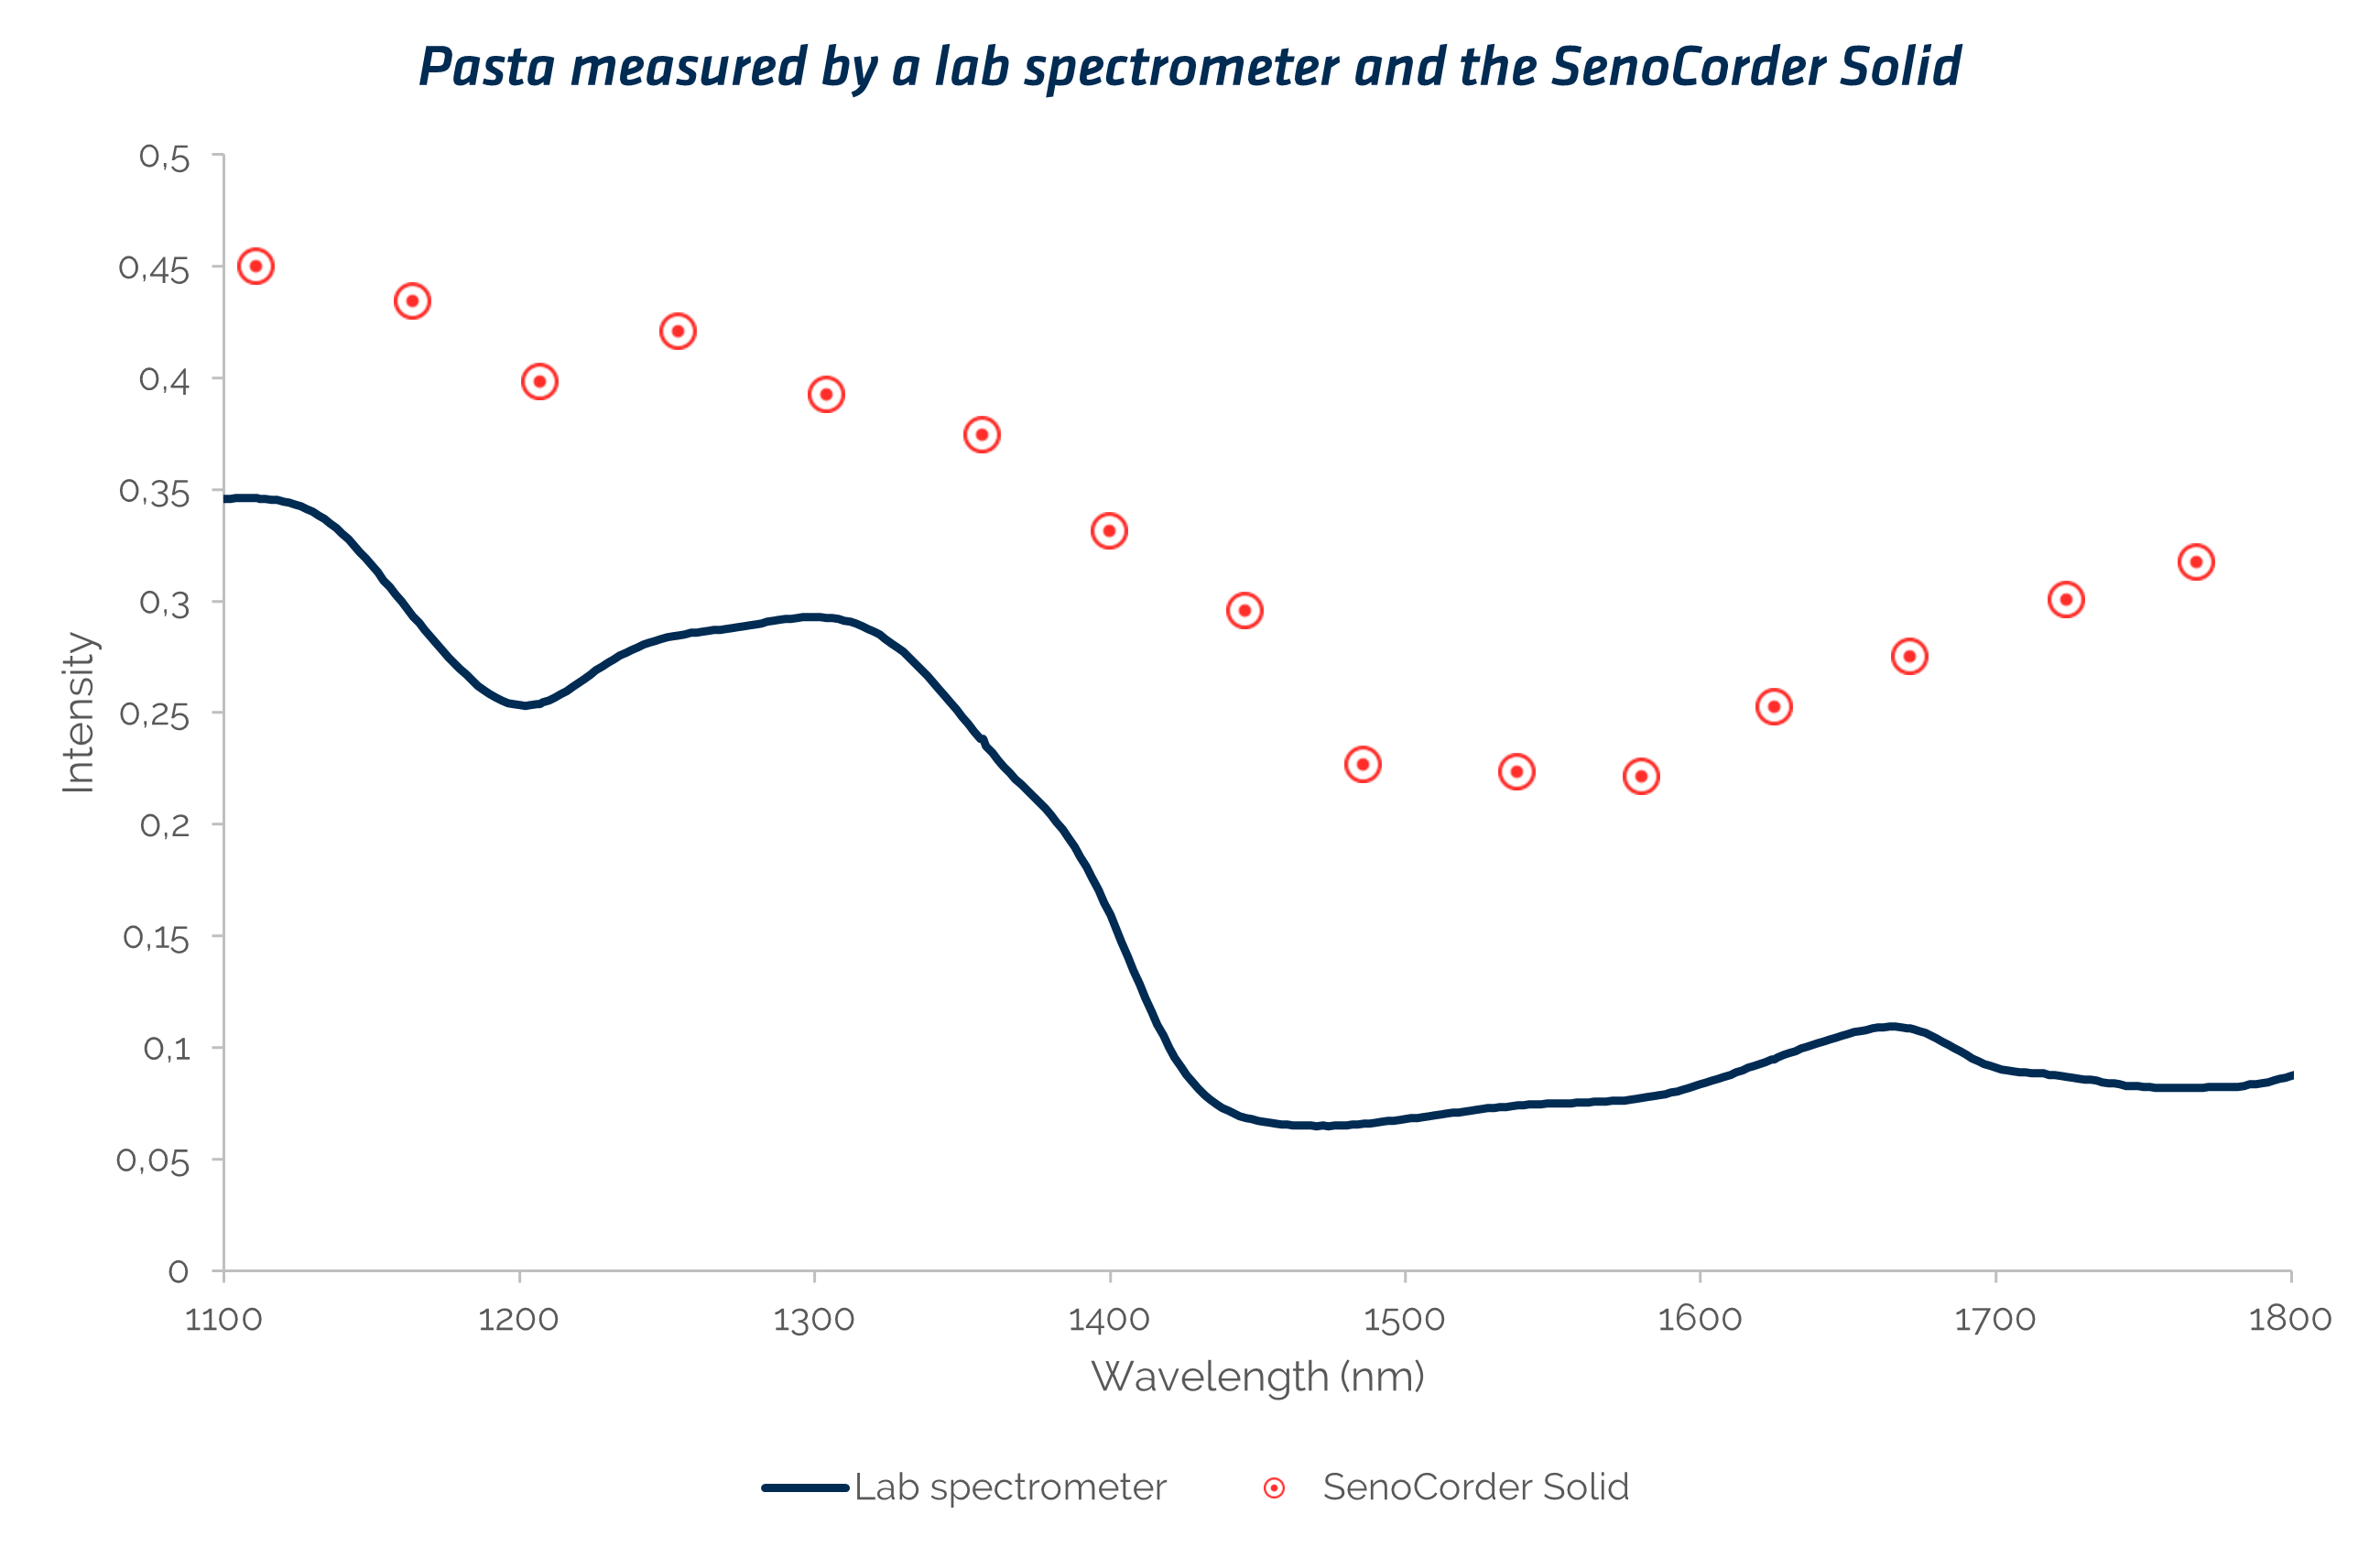 Pasta measured by a lab spectrometer and the SenoCorder Solid